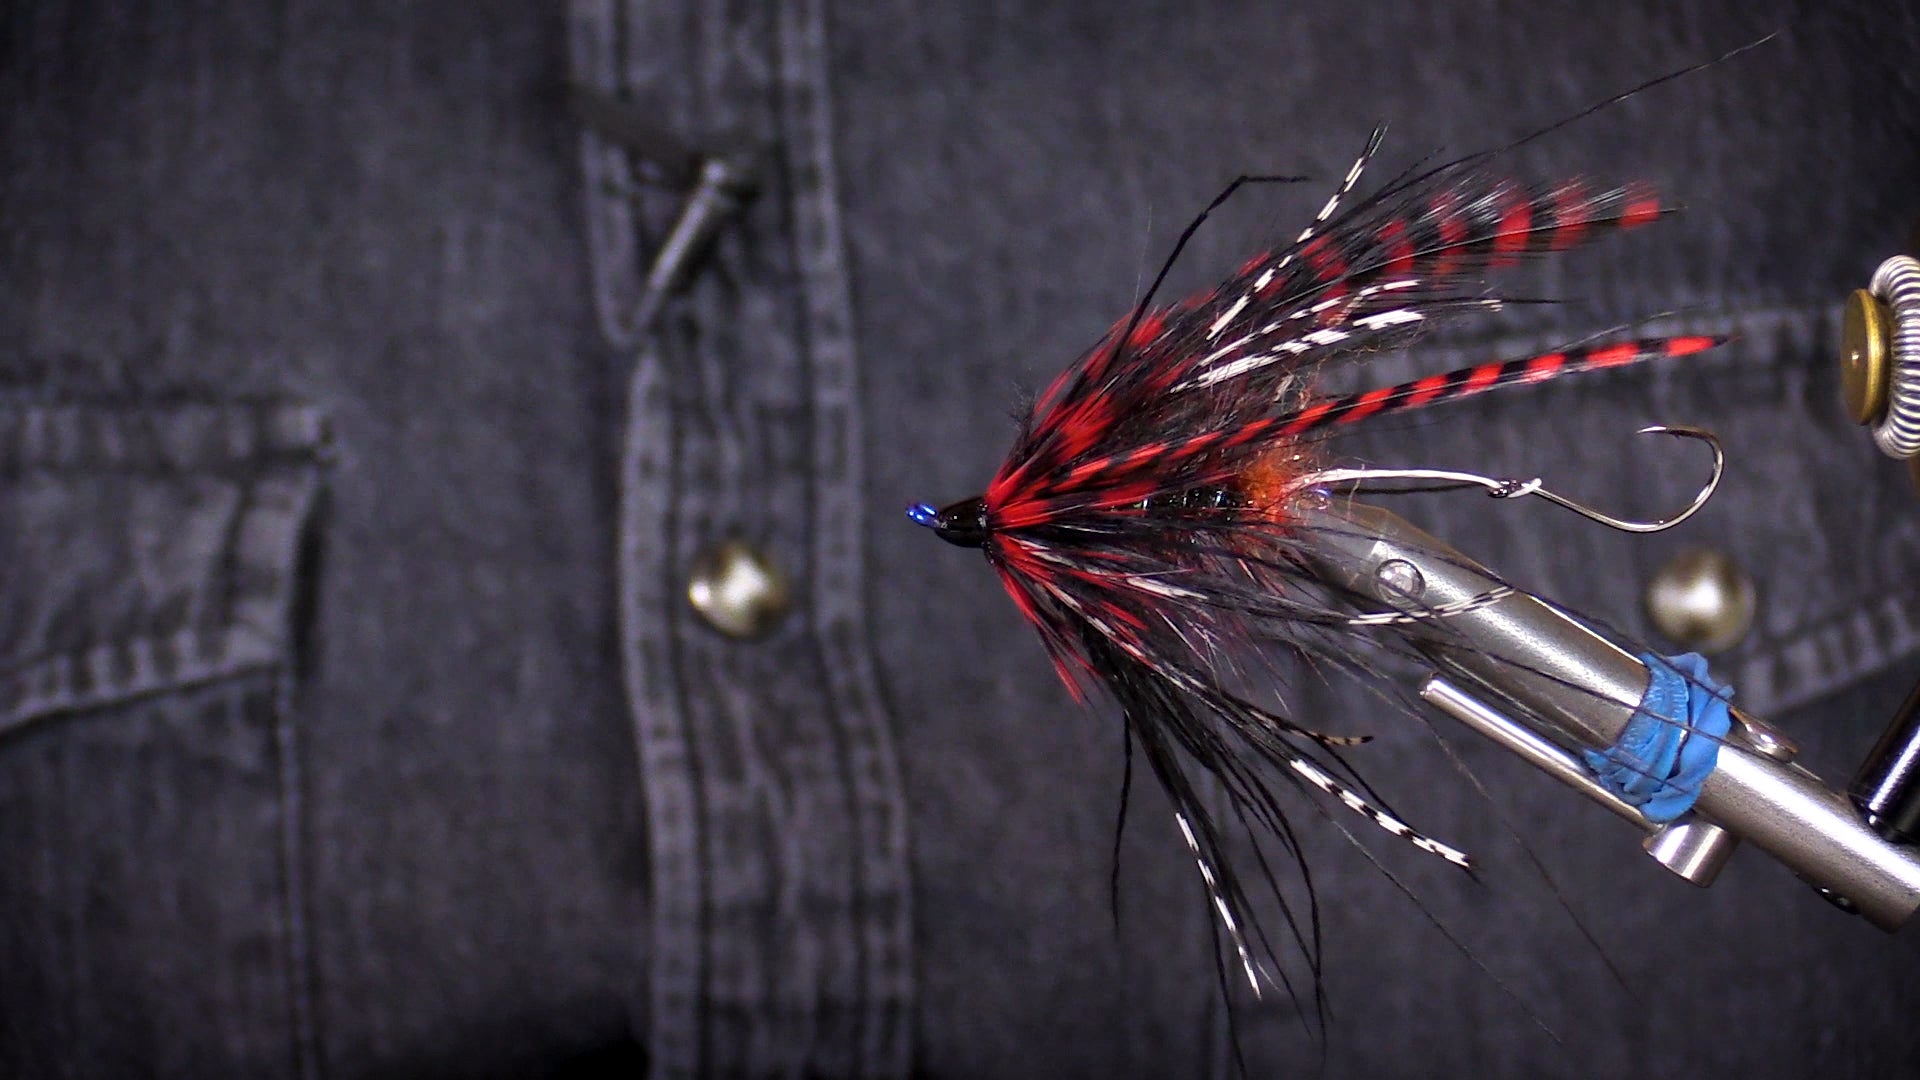 Tying Fish Taco with Barred MFC Materials